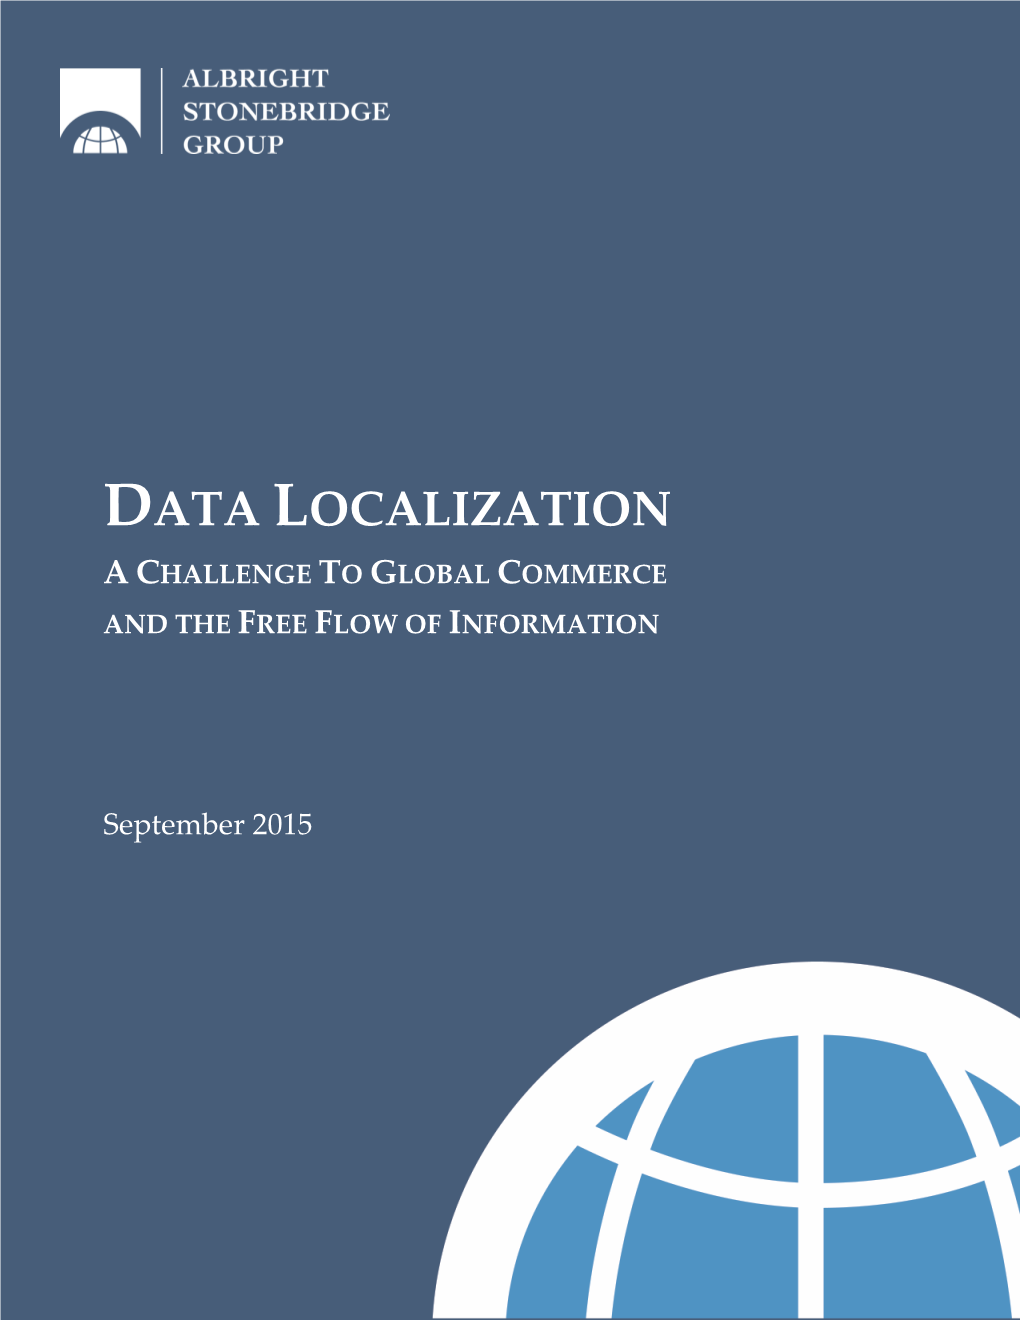 Data Localization a Challenge to Global Commerce and the Free Flow of Information